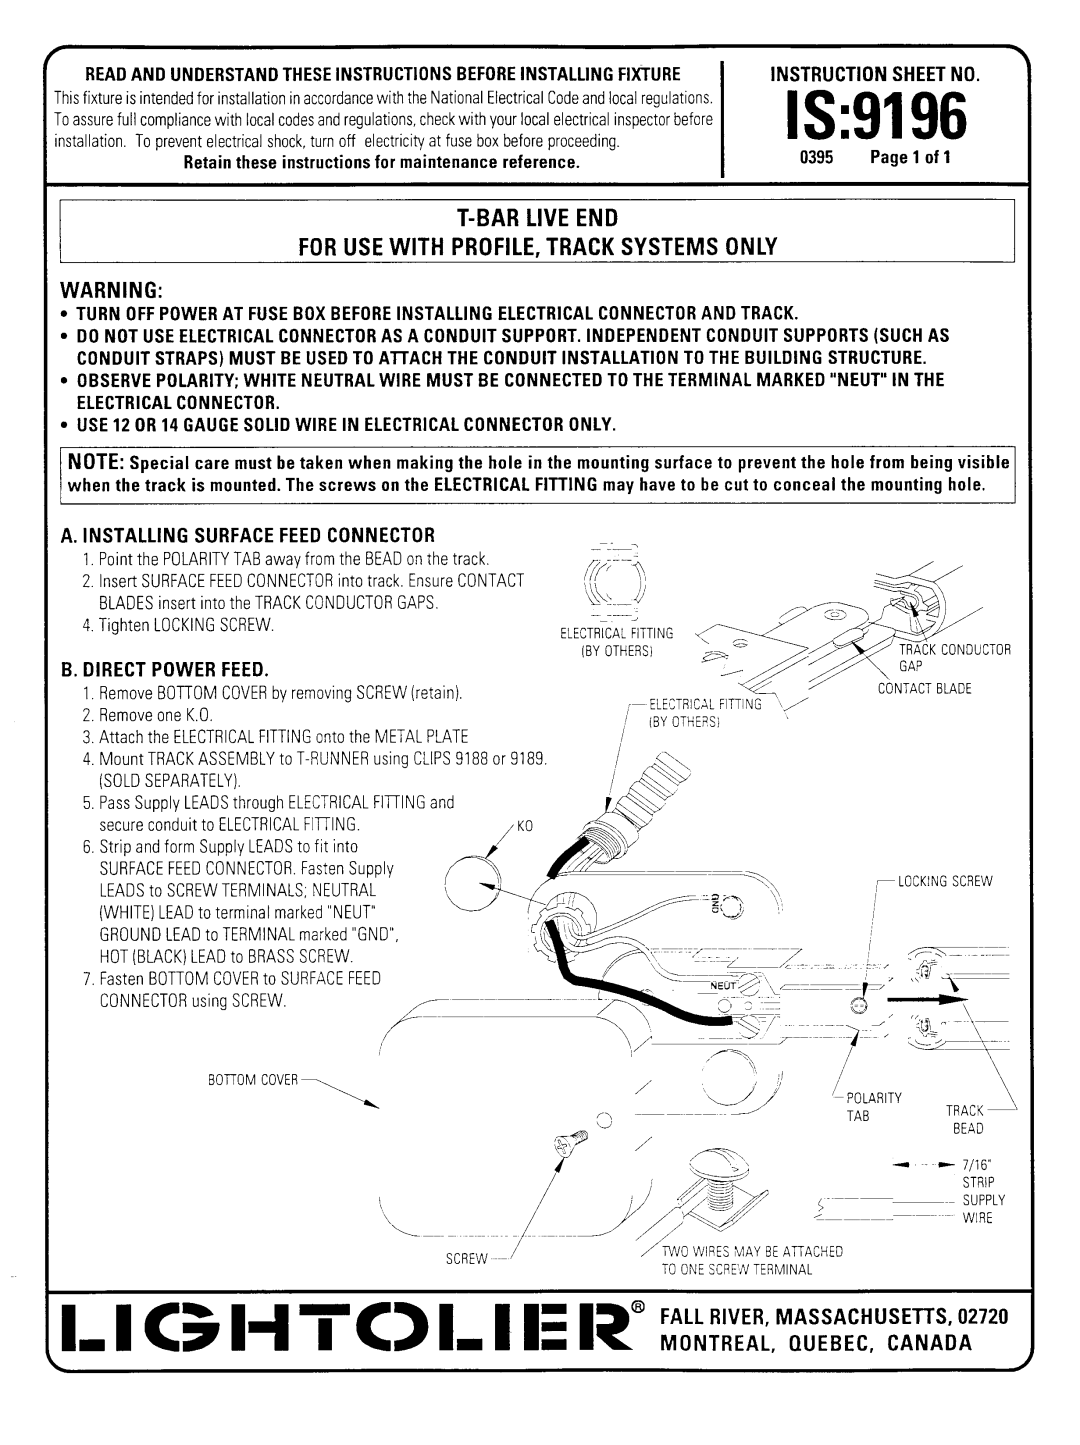 Lightolier 9196 instruction sheet Is, T-Barlive End, For Use With Profile, Track Systems Only, B. Direct Power Feed 